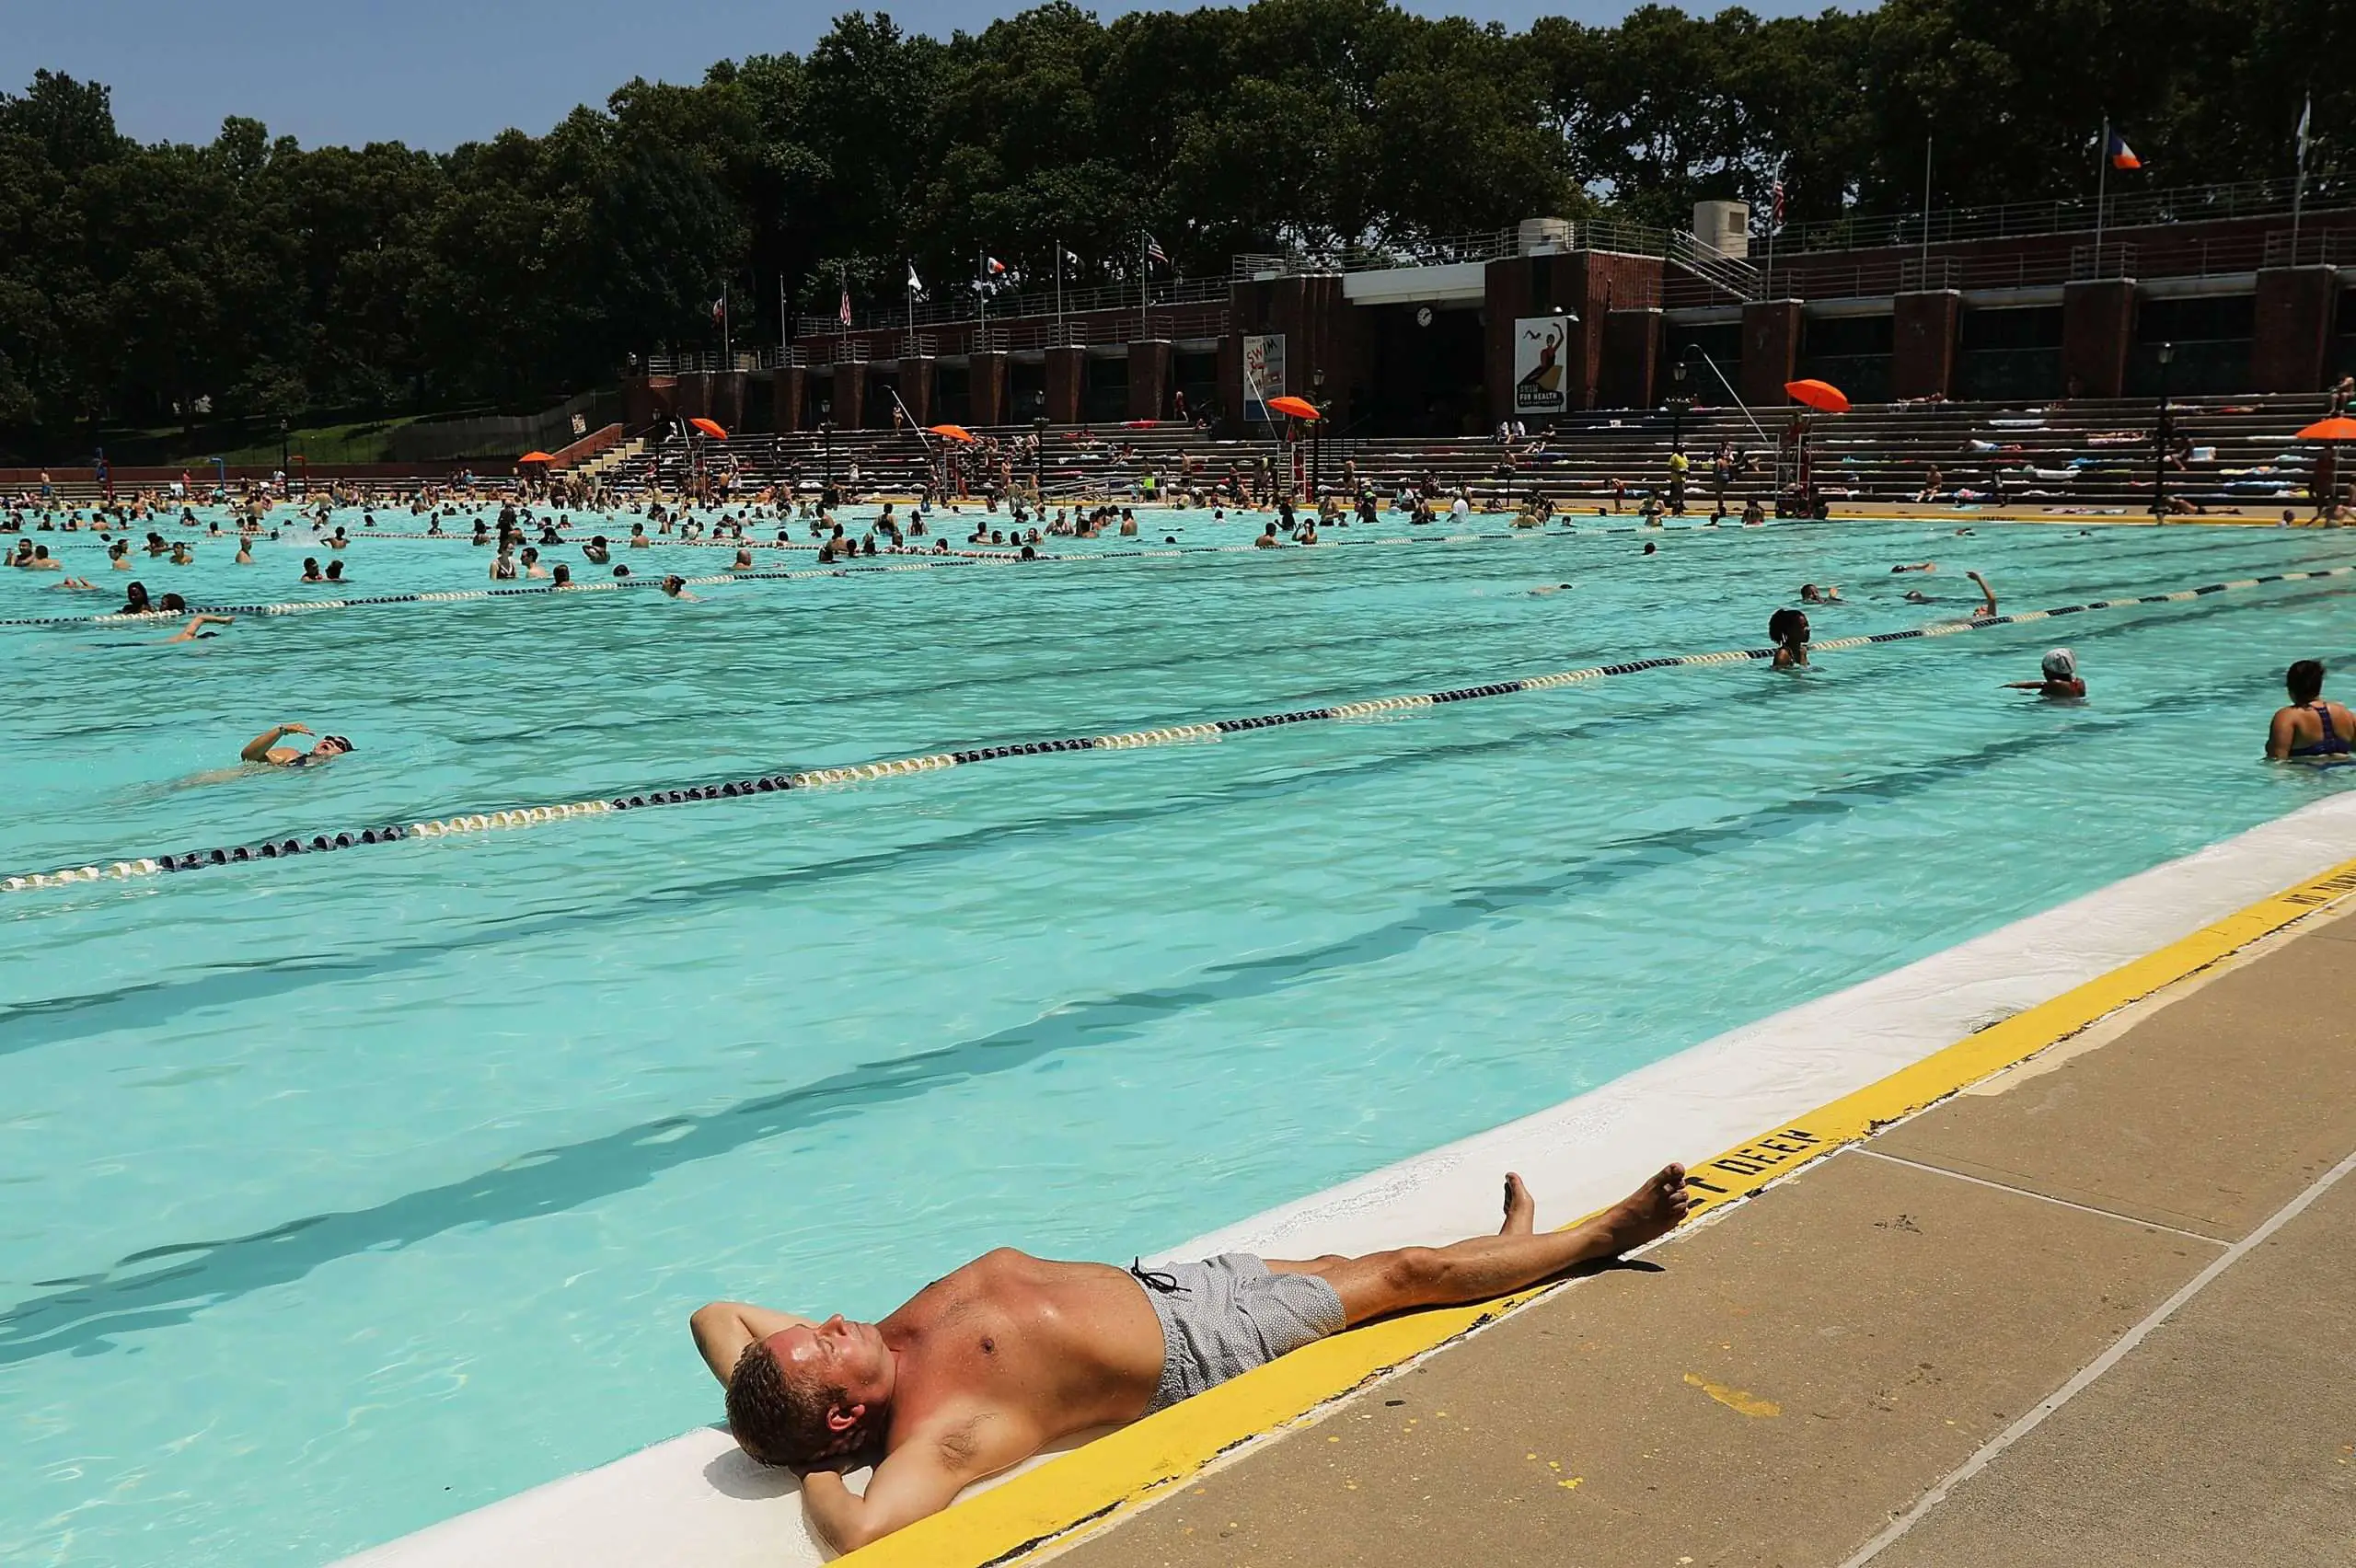 Is it safe to go to public pools this summer?